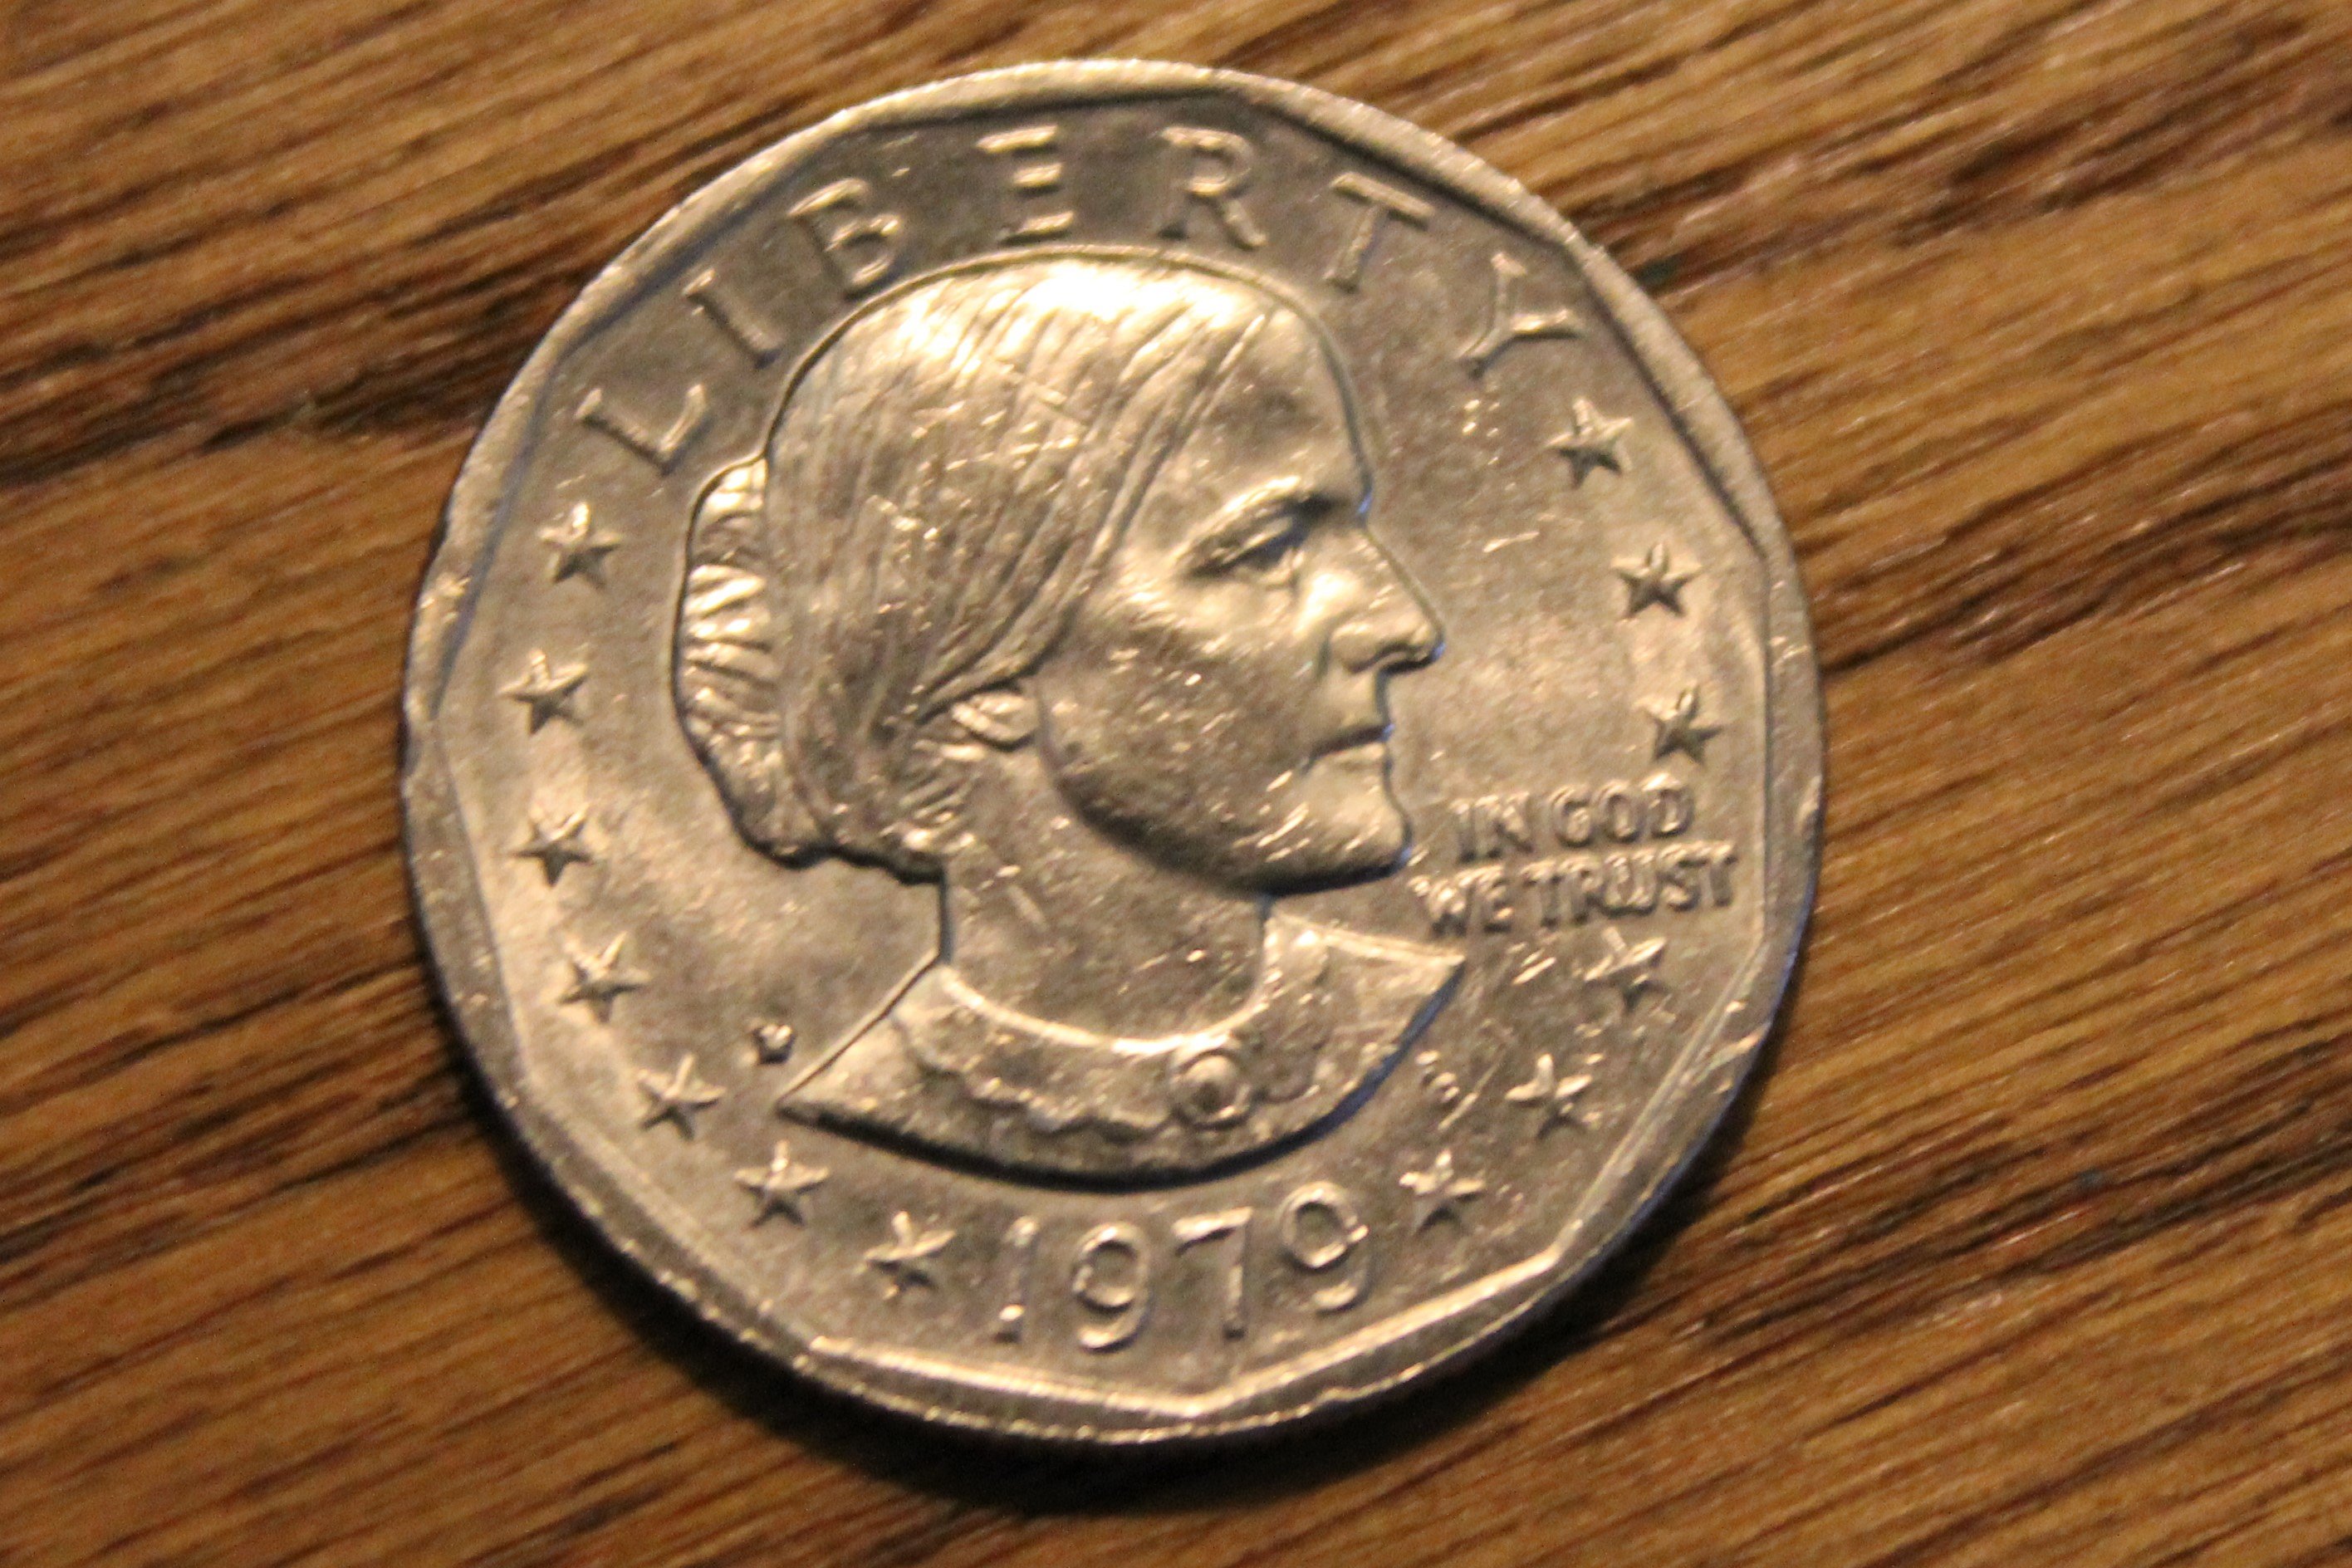 1979 P Susan B. Anthony dollar coin - Circulated. - for sale, buy now online - Item ...2832 x 1888